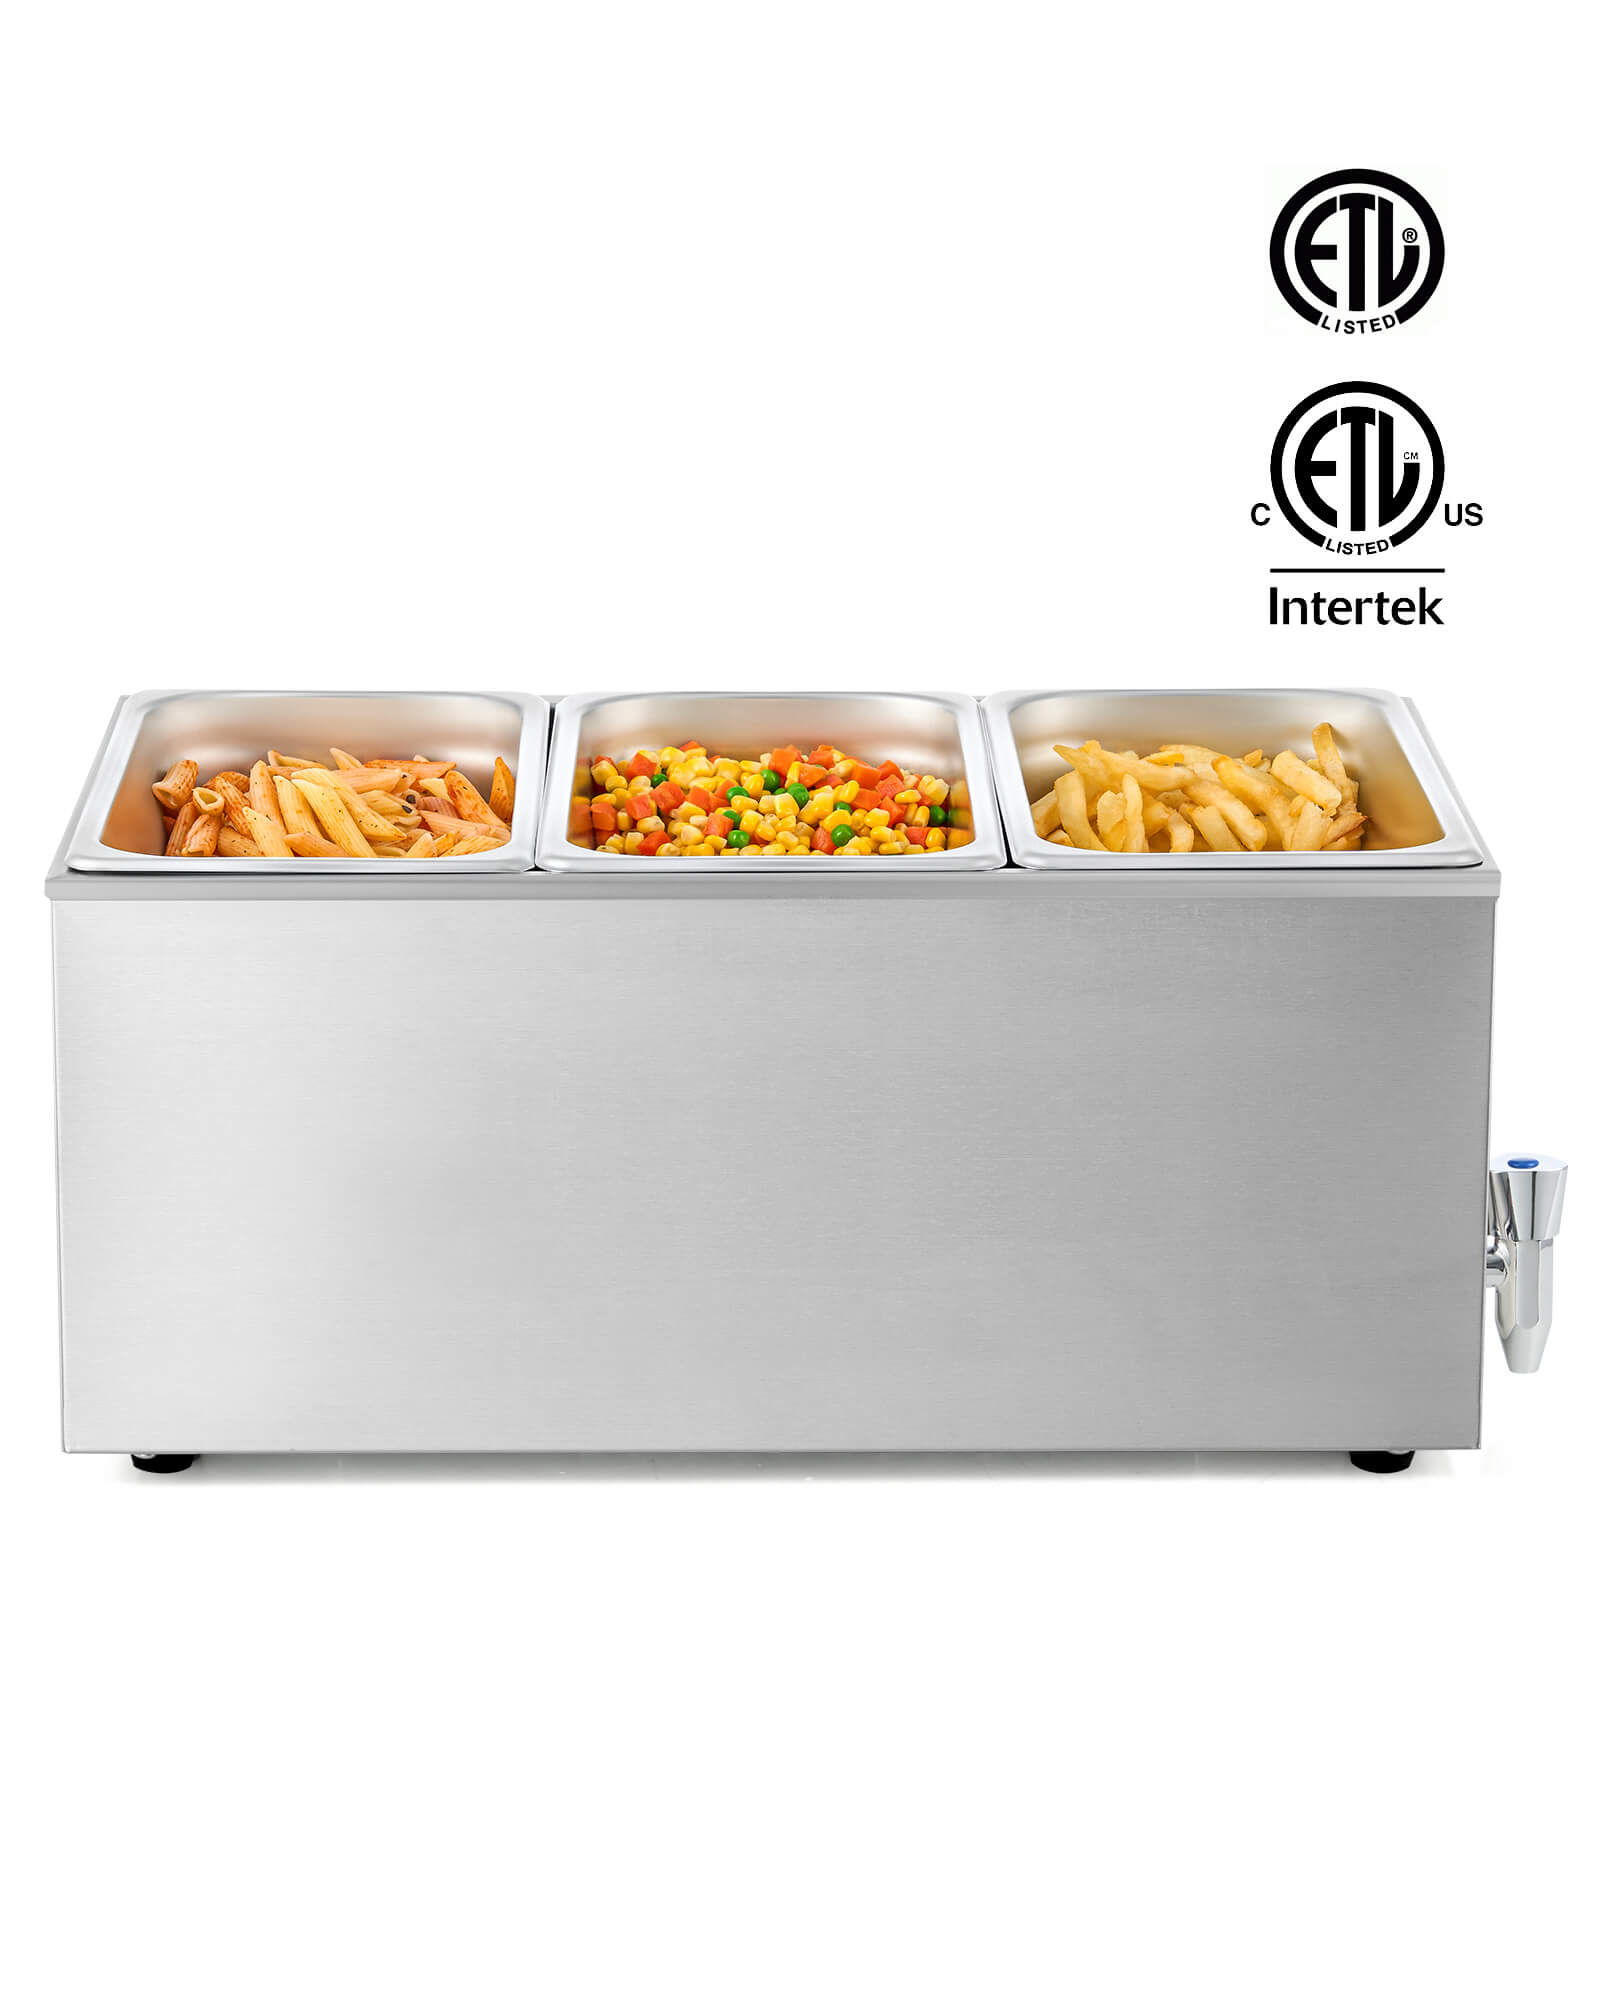 12 x 20 in Full Size Triple Well Electric Countertop Food Warmer with 3 Pan Cover & Faucet